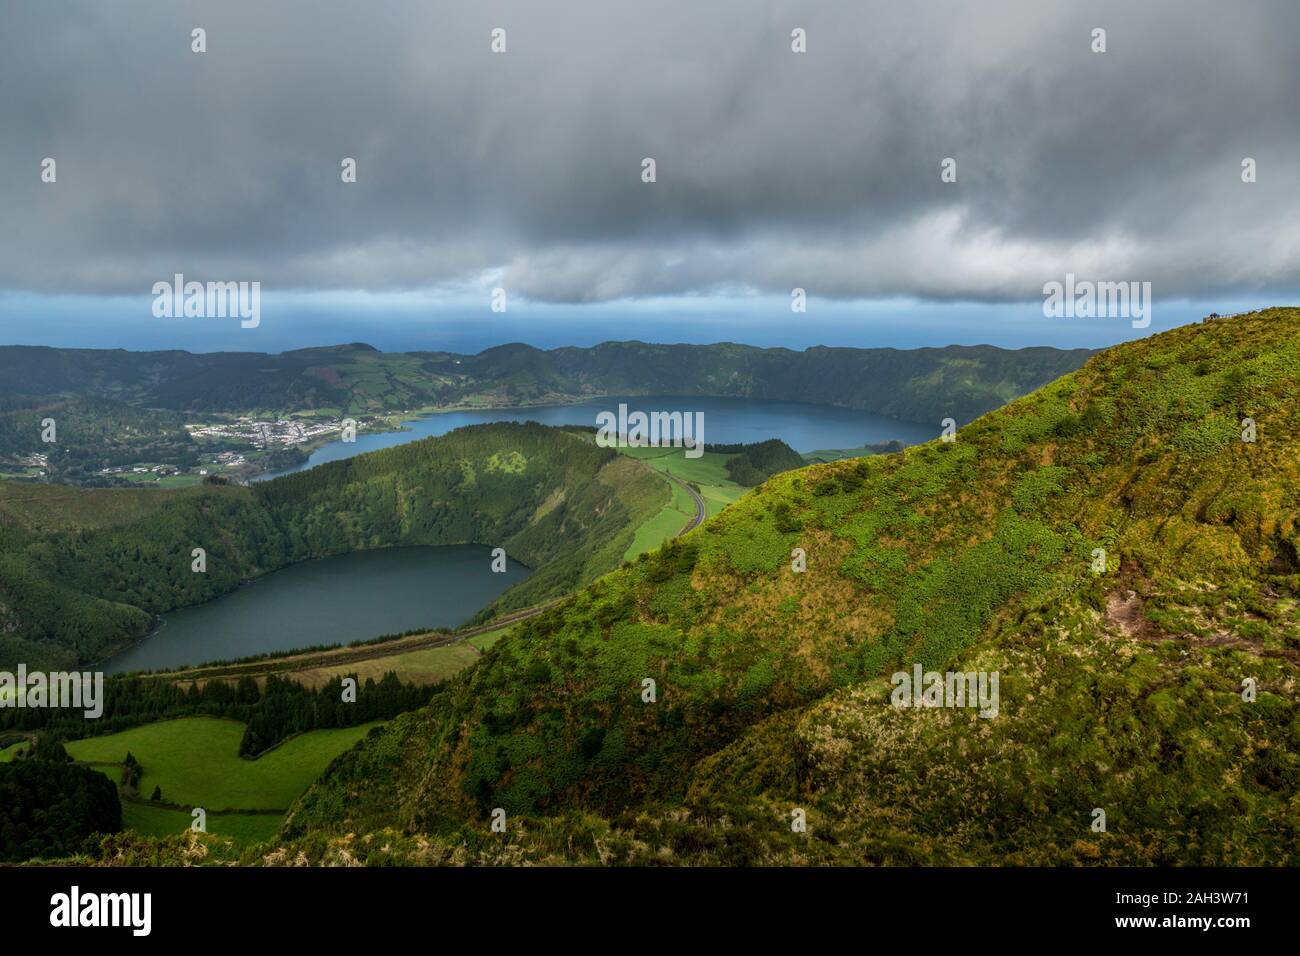 Looking down on Sete Cidades with Lagoa do Canario and Lagoa Rasa on the island of sao Miguel in the Azores. Stock Photo